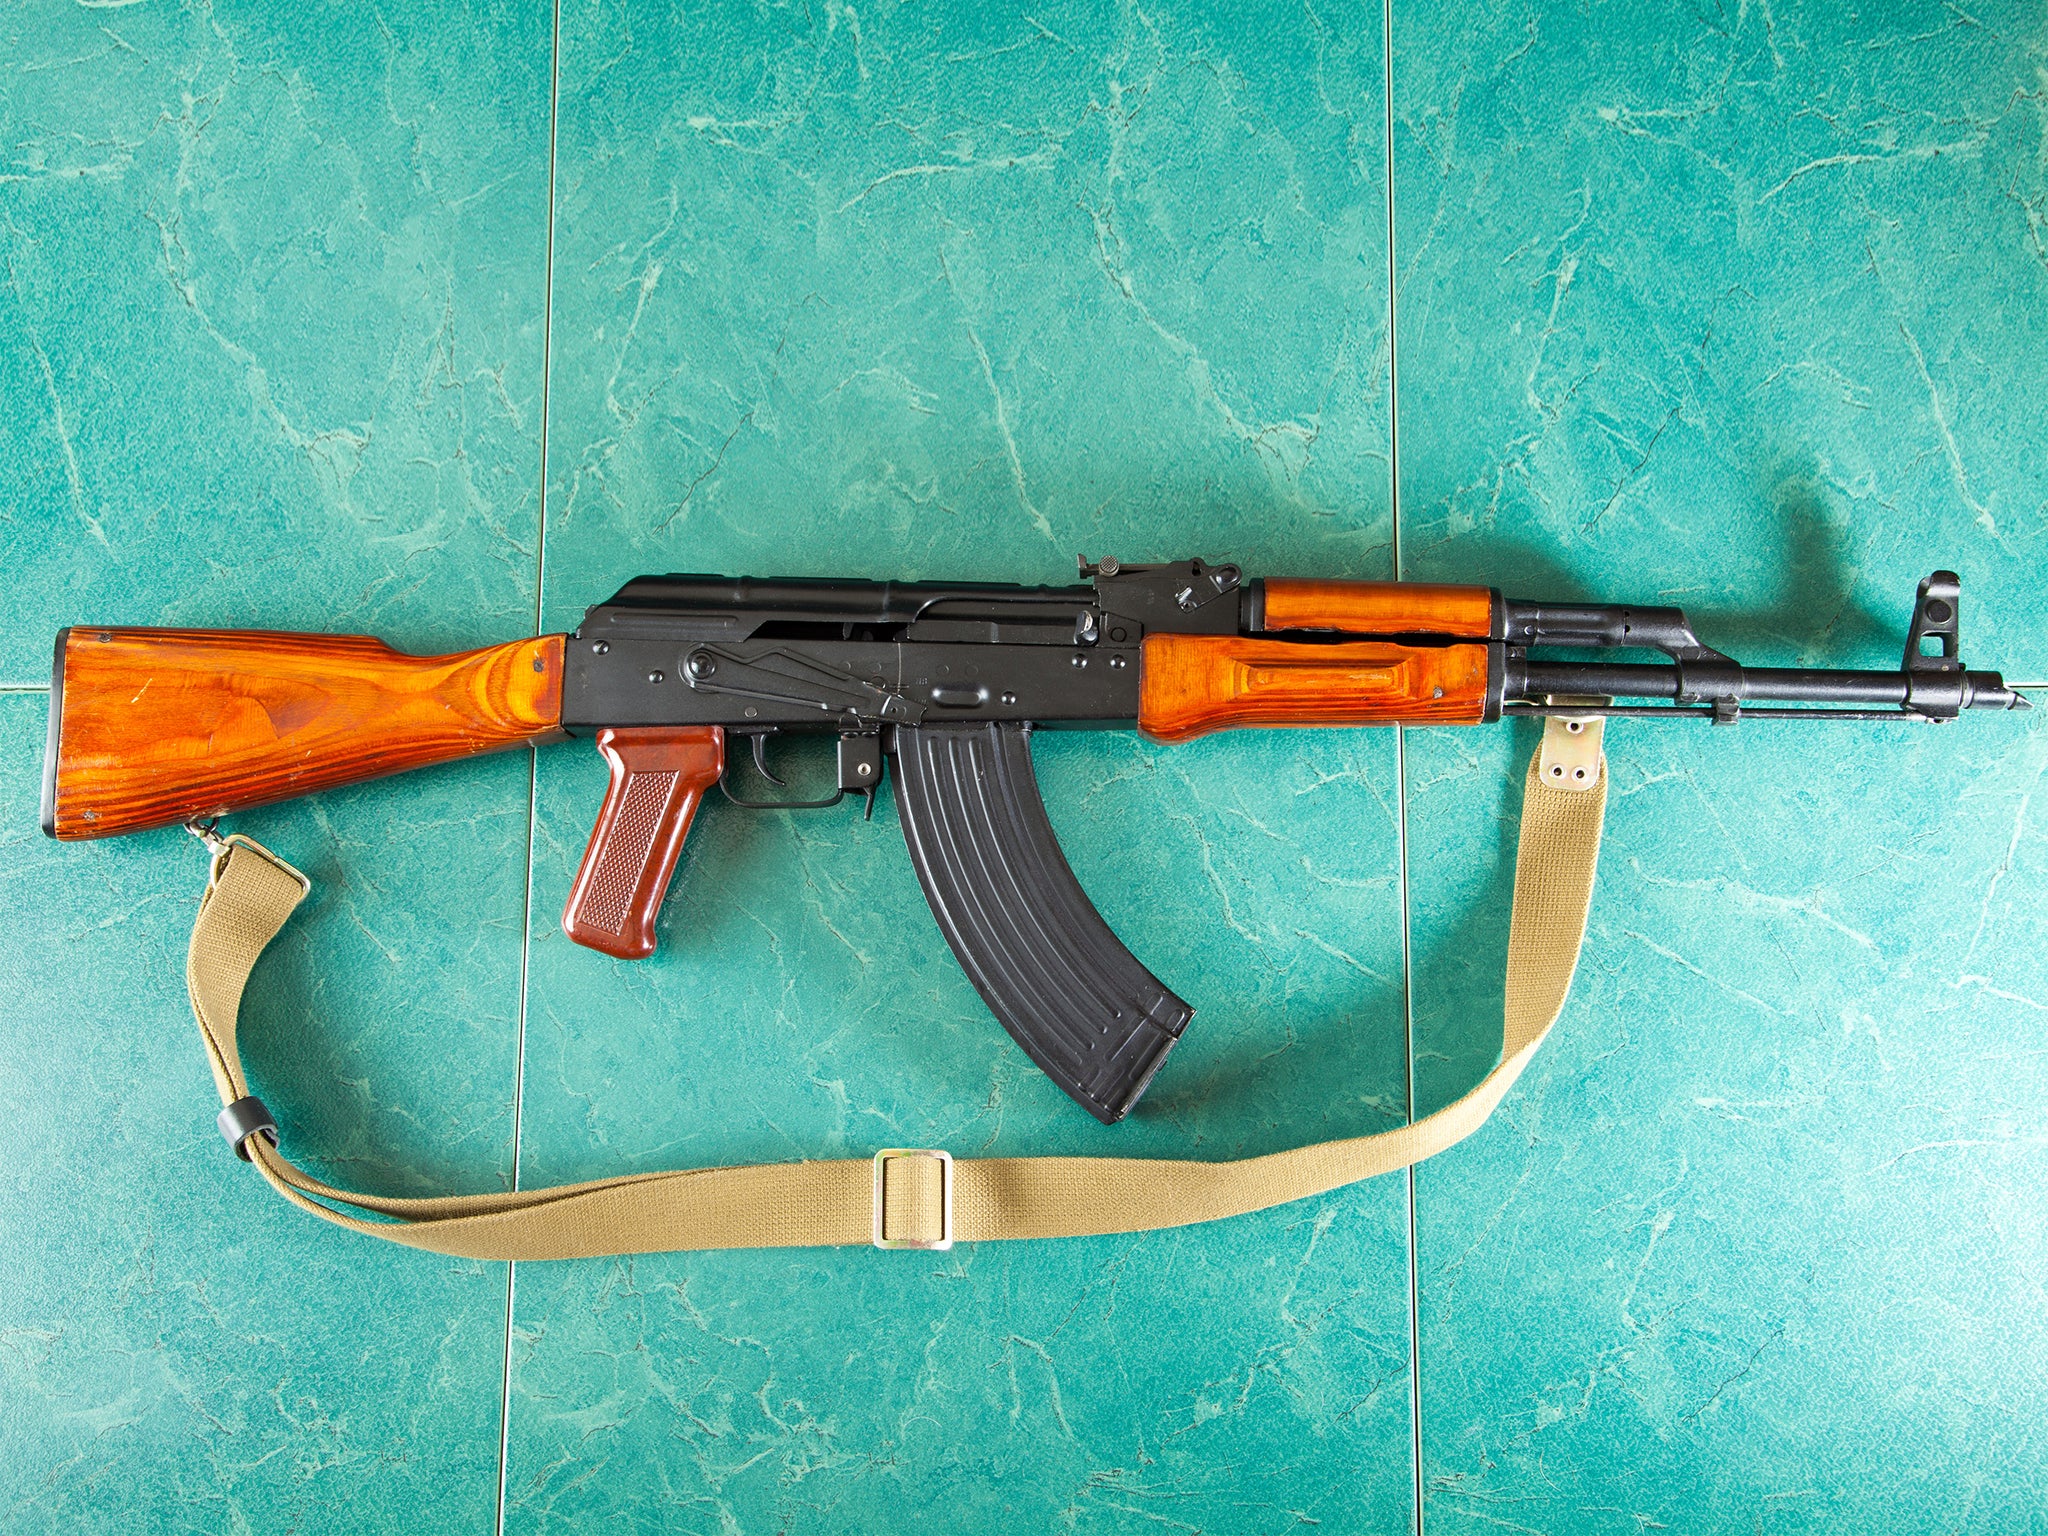 The AK-47: a malevolent 'super-power' that changed the course of